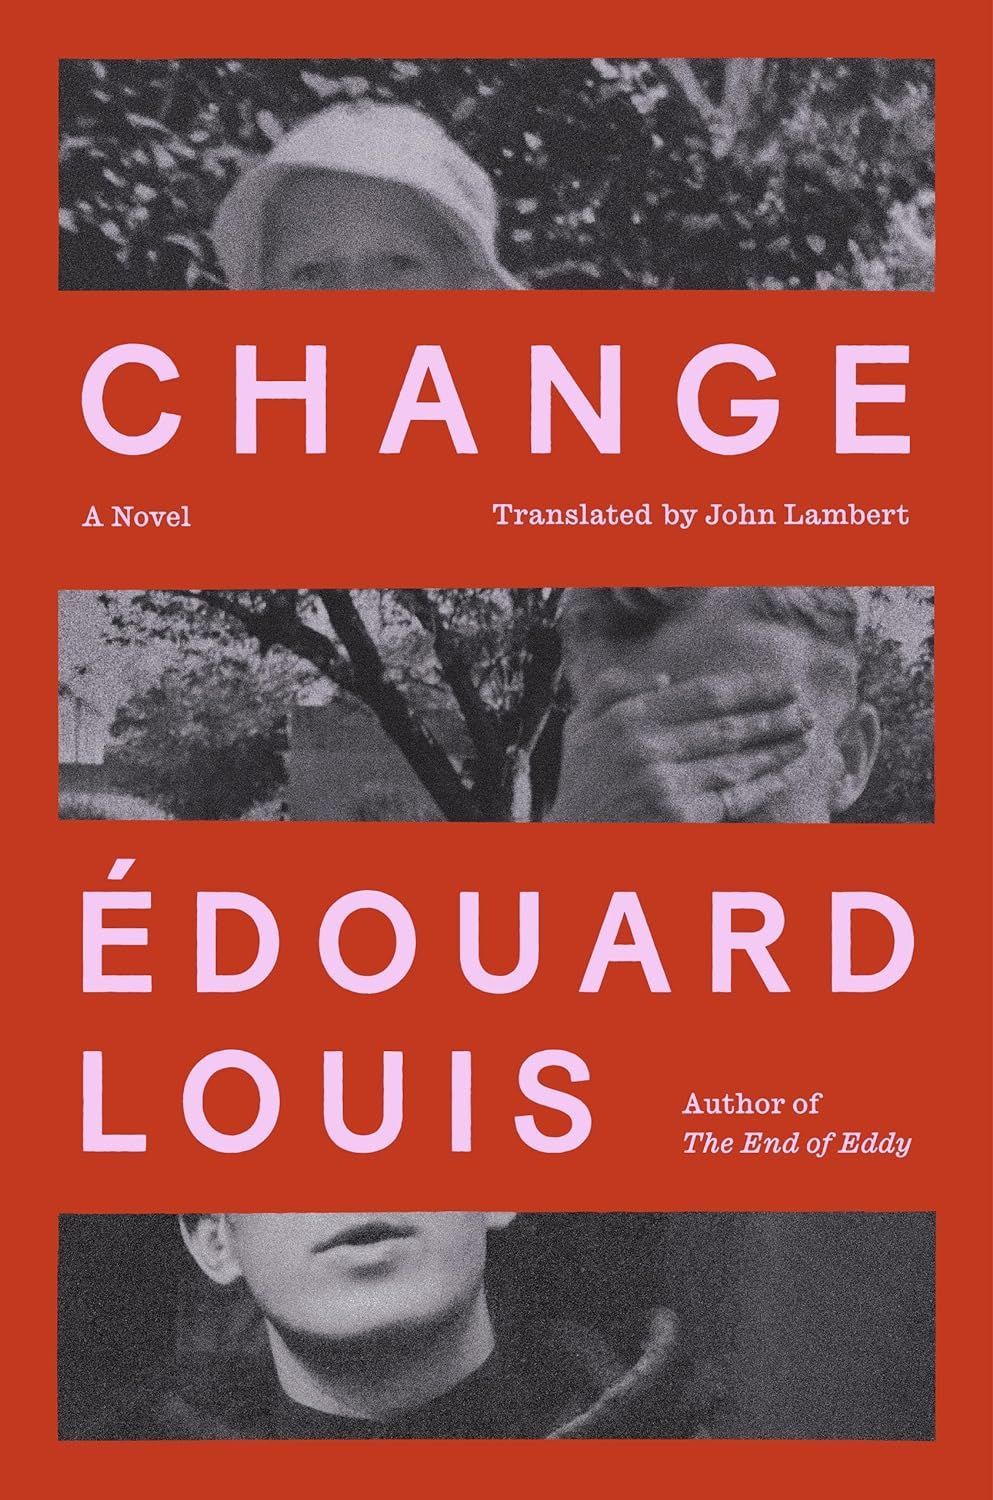 A Wound Is Objective: A Conversation with Édouard Louis